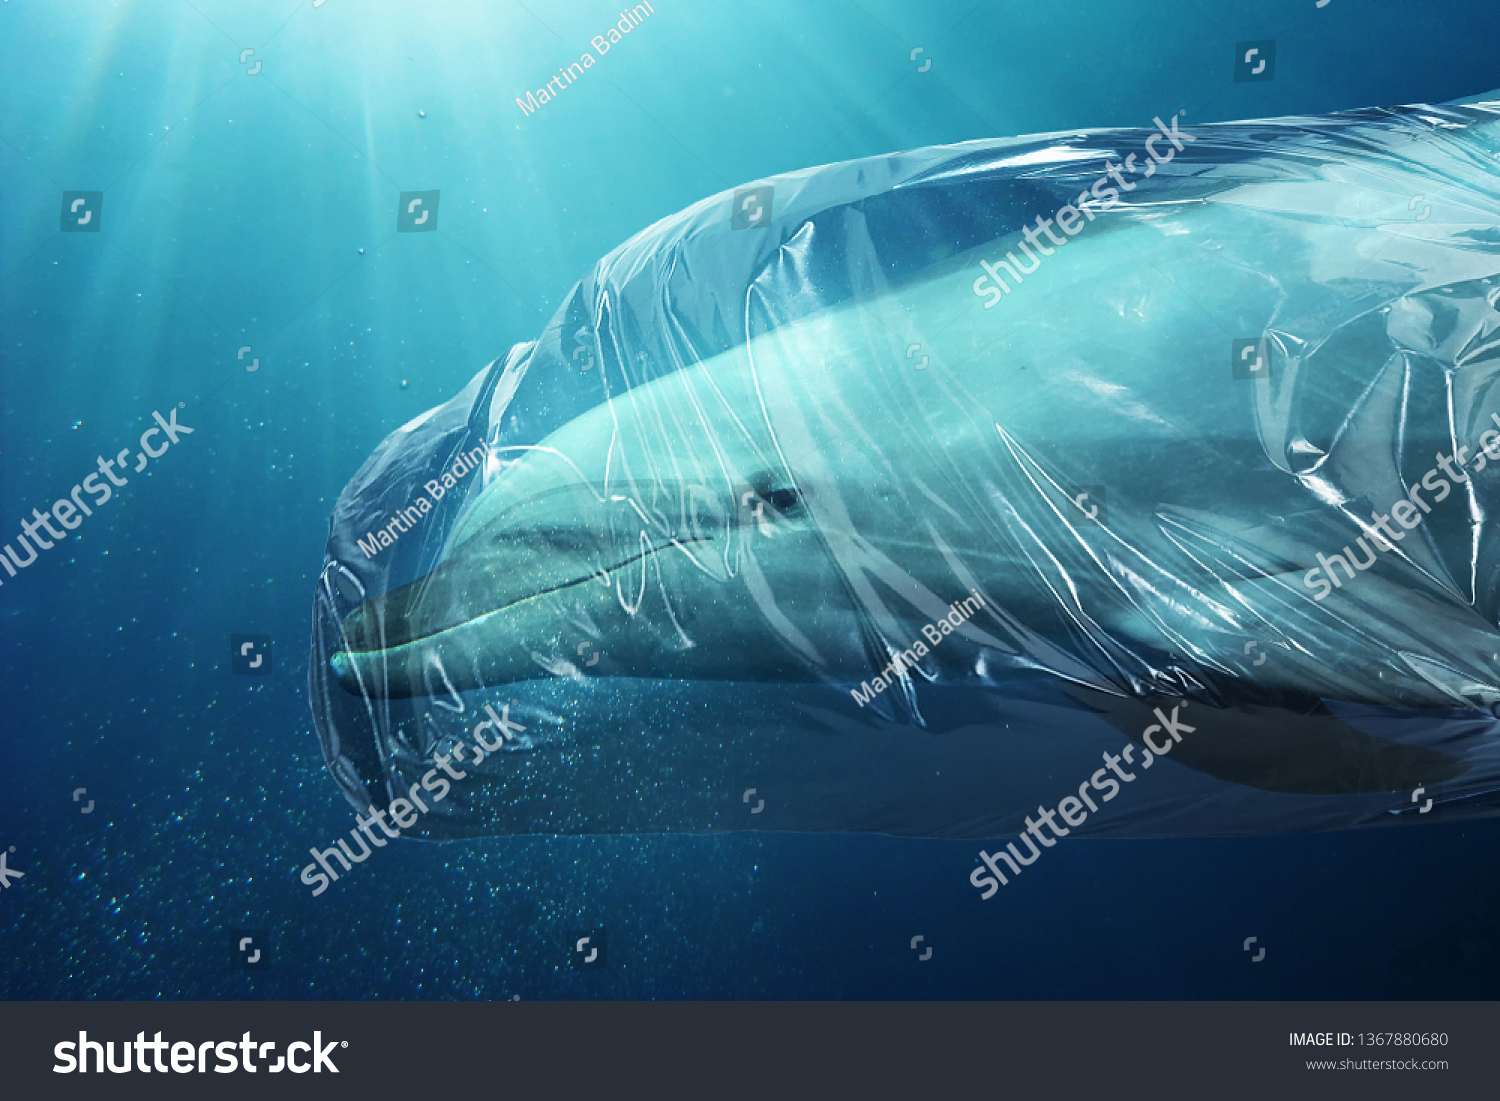 Dolphin trapped in a plastic bag. Pollution in oceans concept. #1367880680